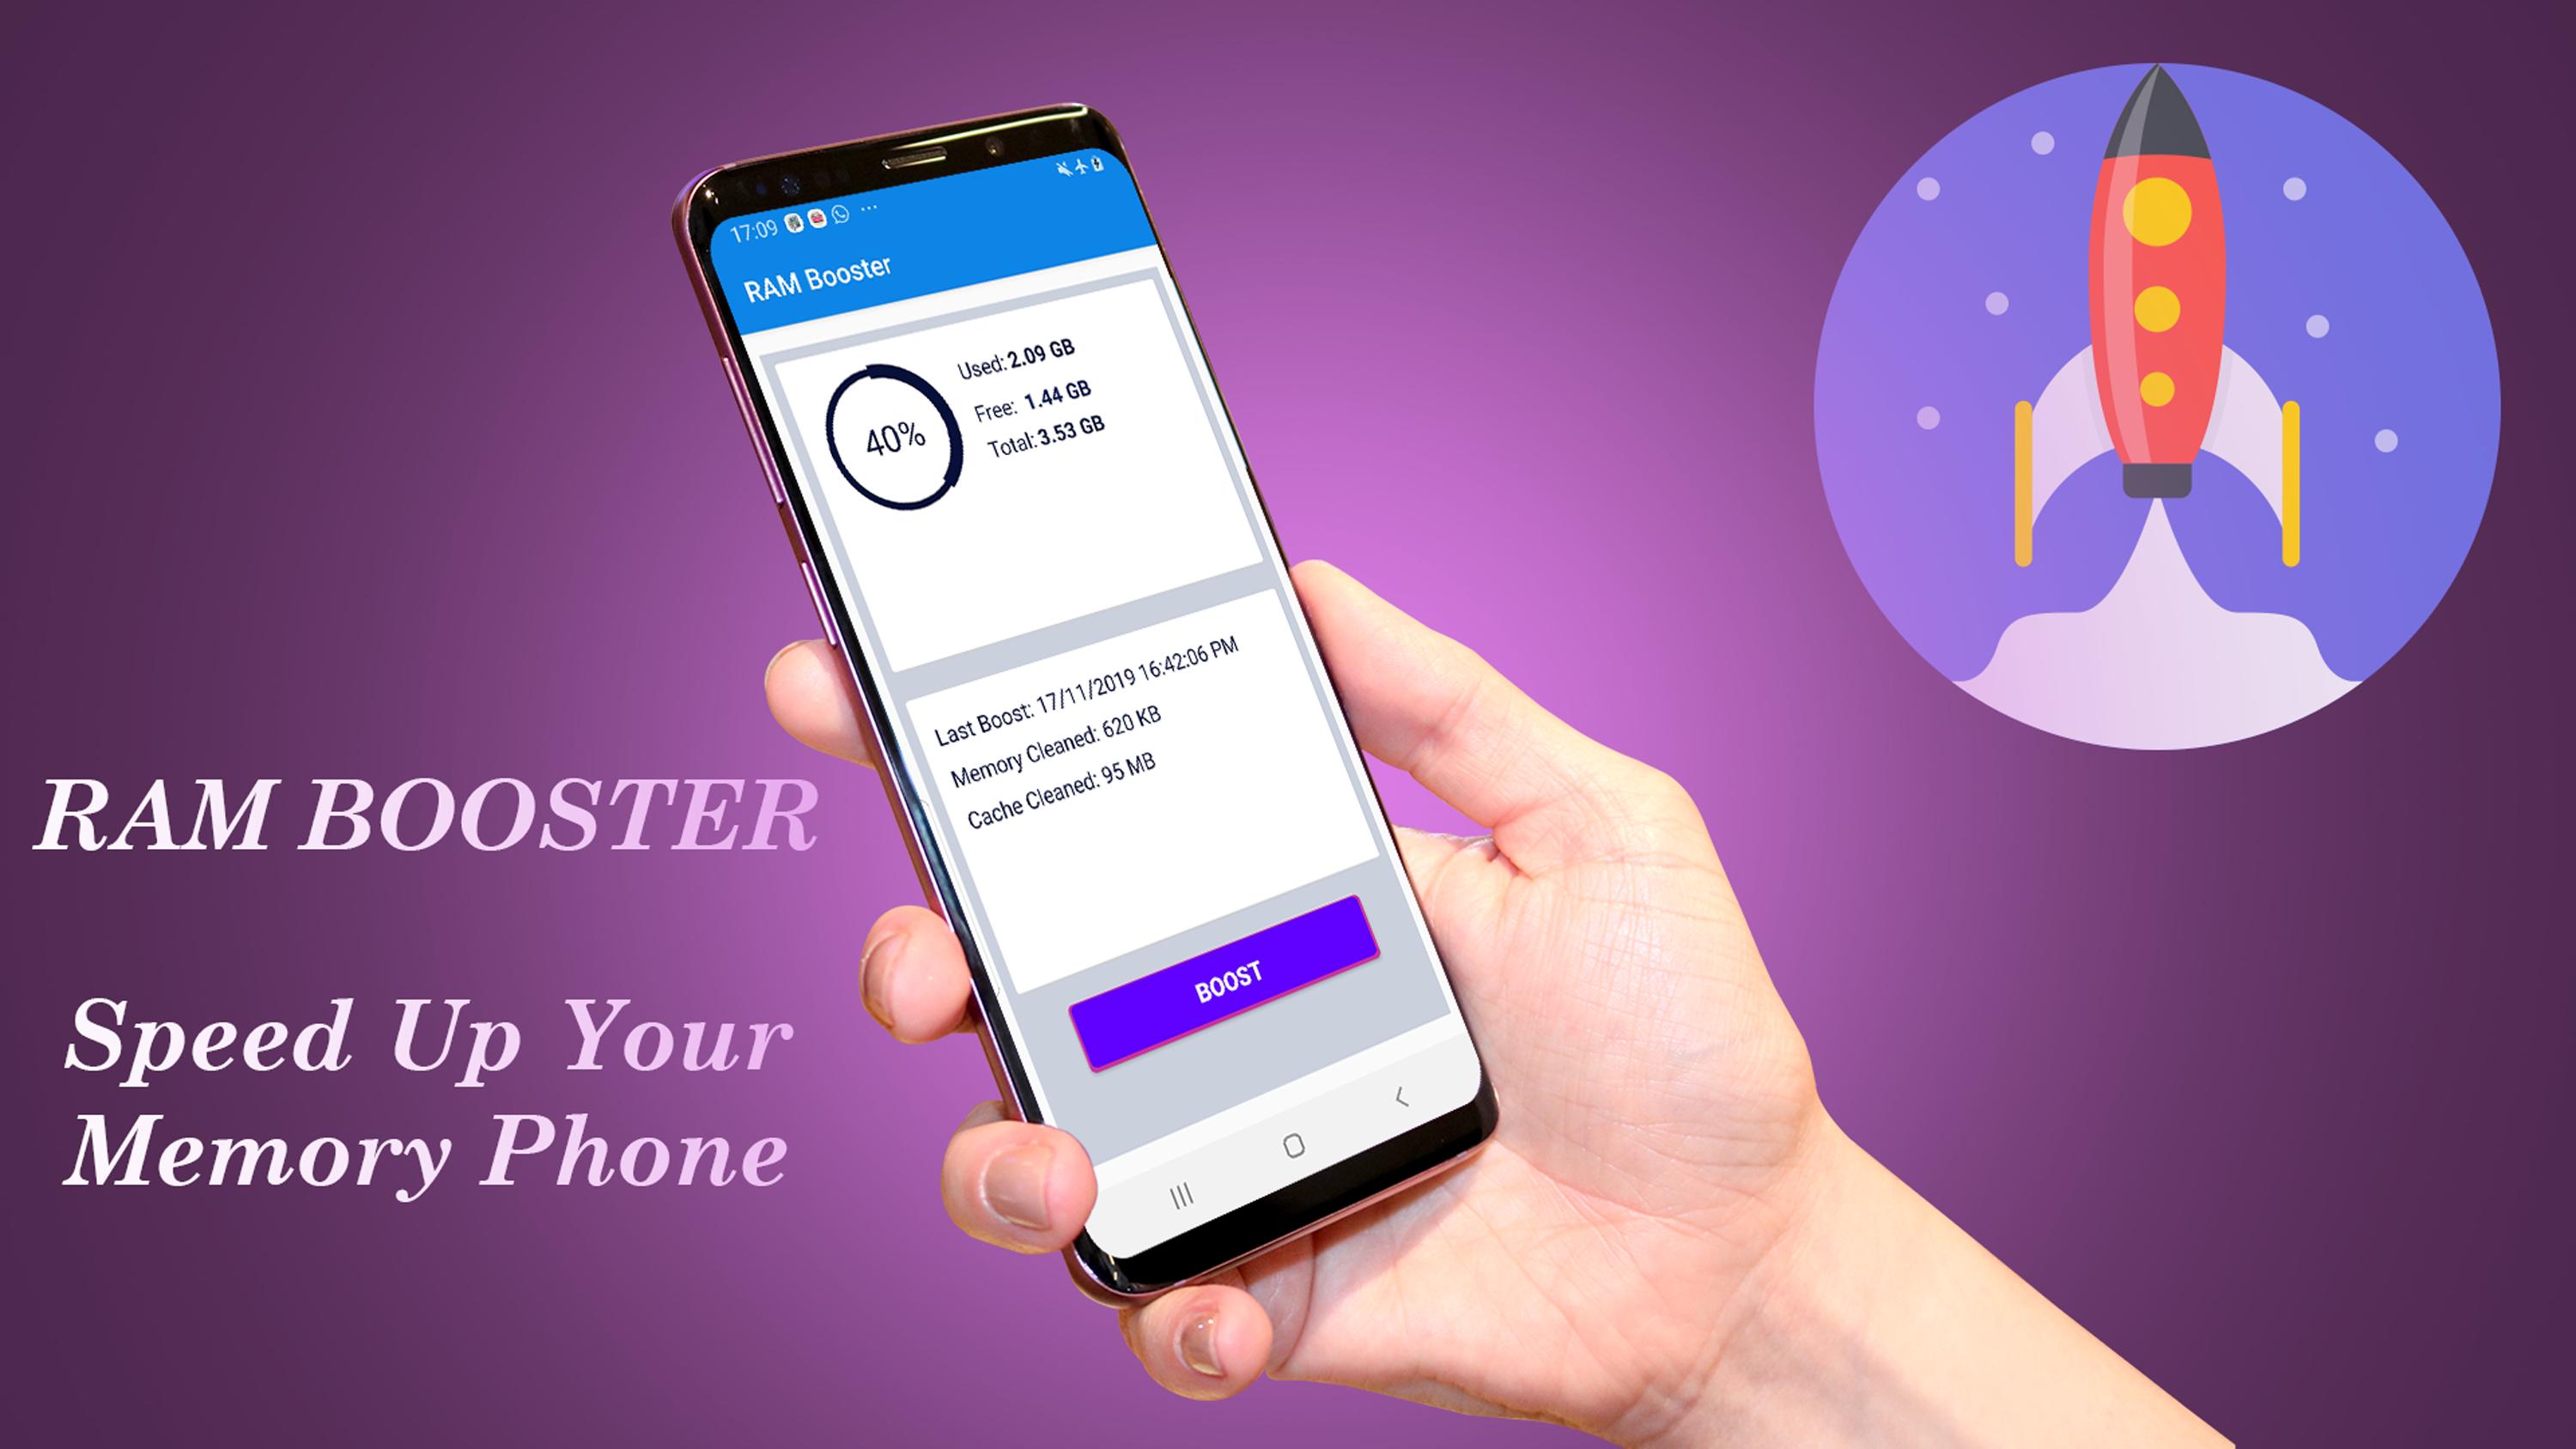 repair system phone & fix android problems for Android - APK Download